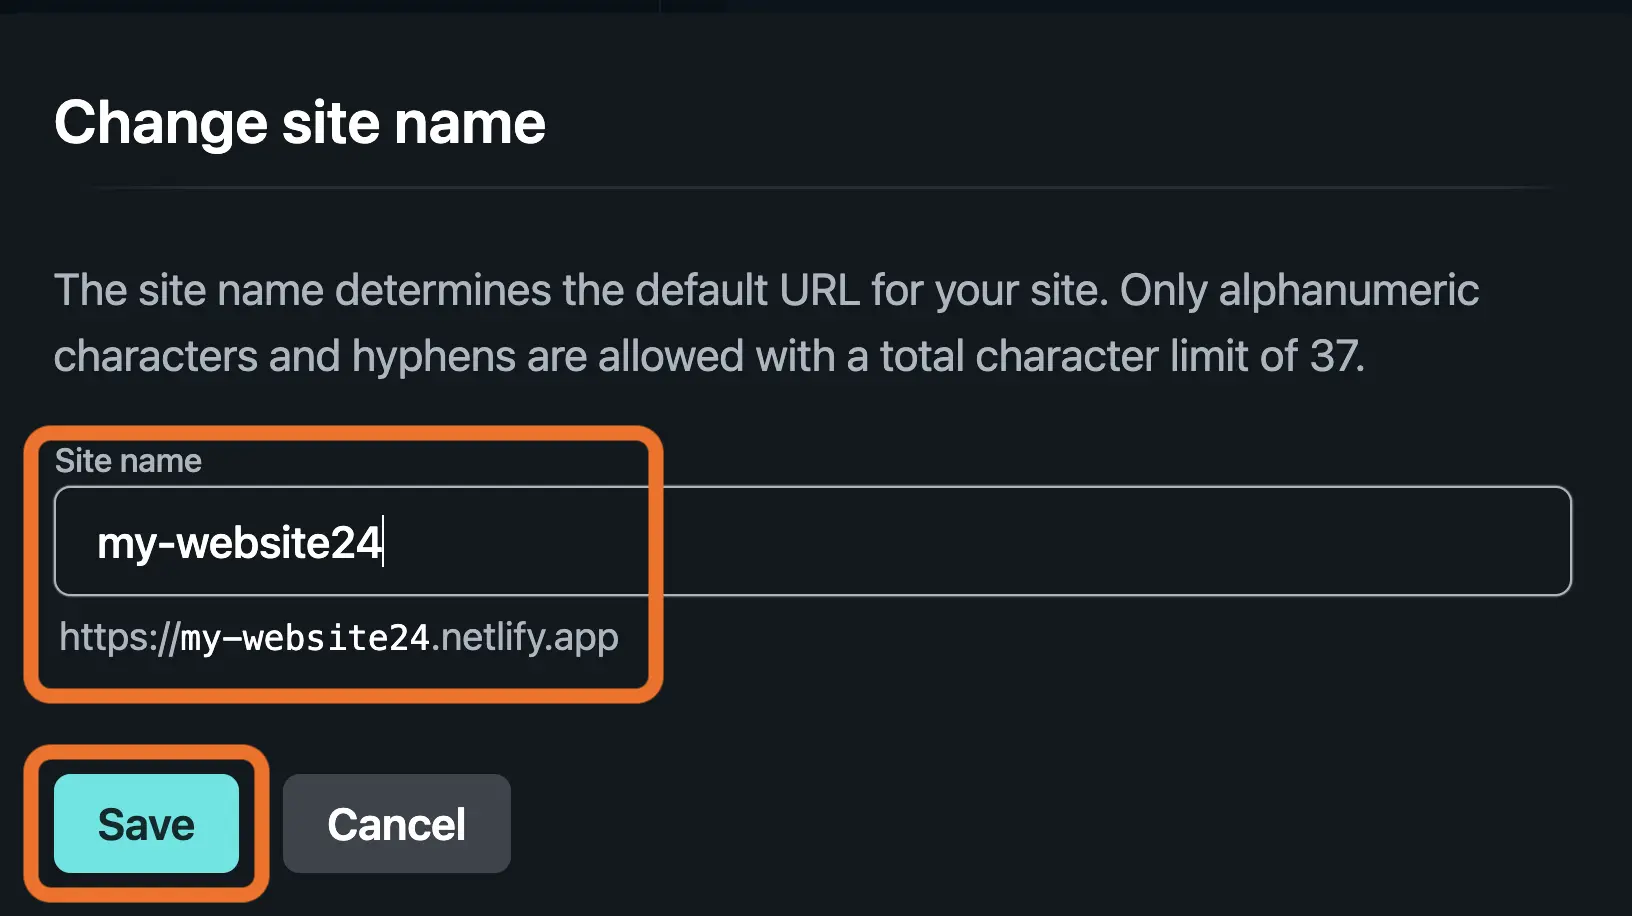 Netlify change site name dialog box with new name of my-website24.netlify.app.